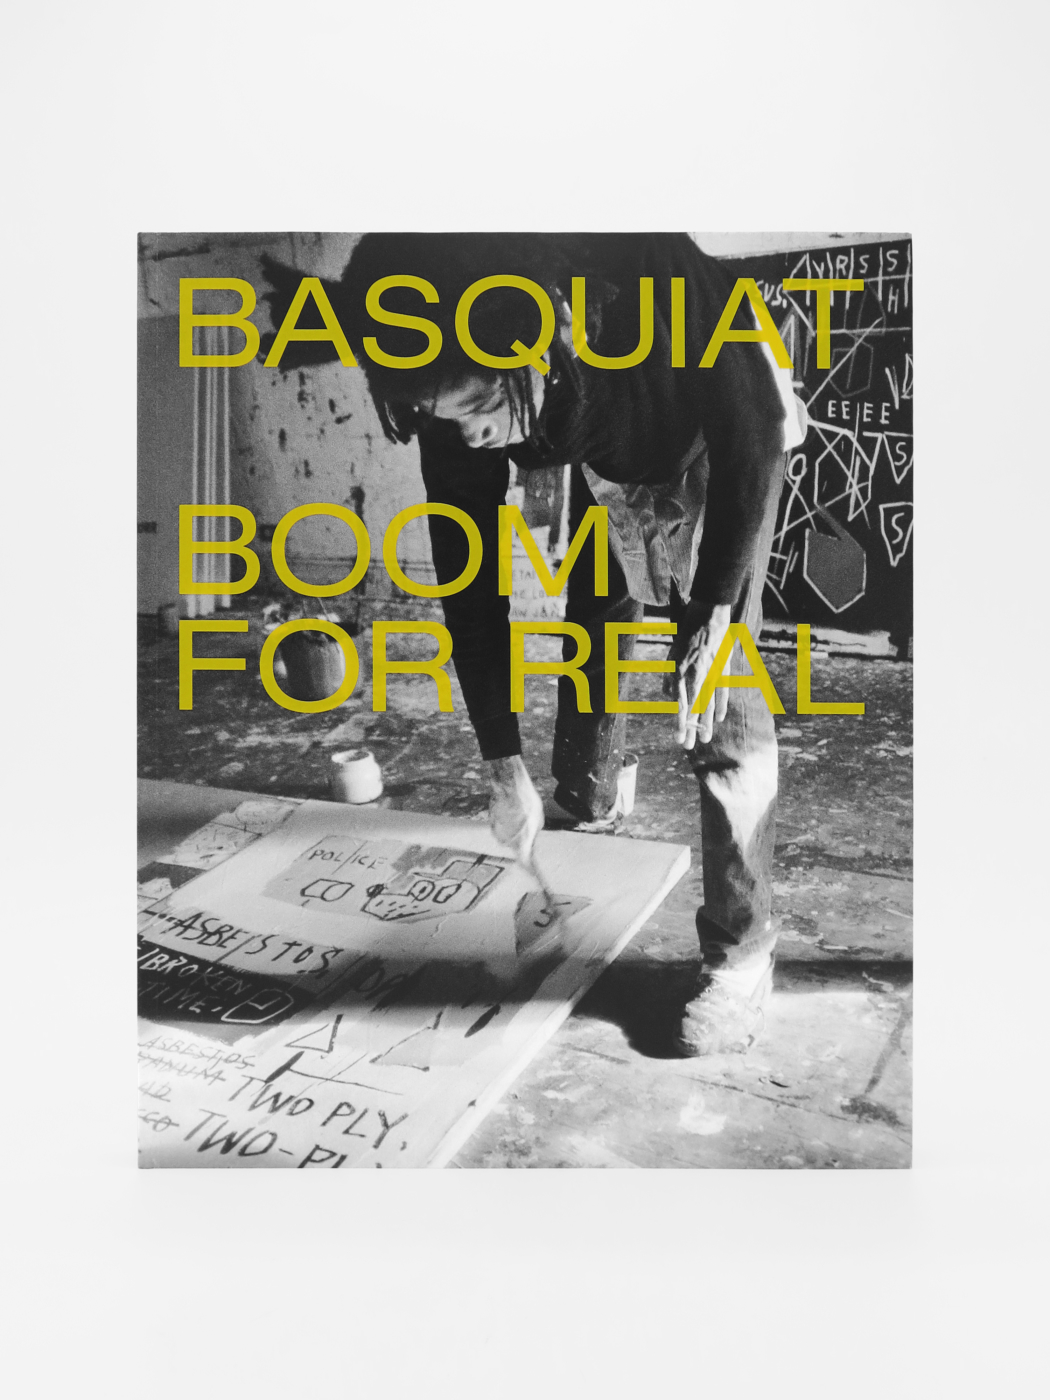 Jean-Michel Basquiat, Boom for Real